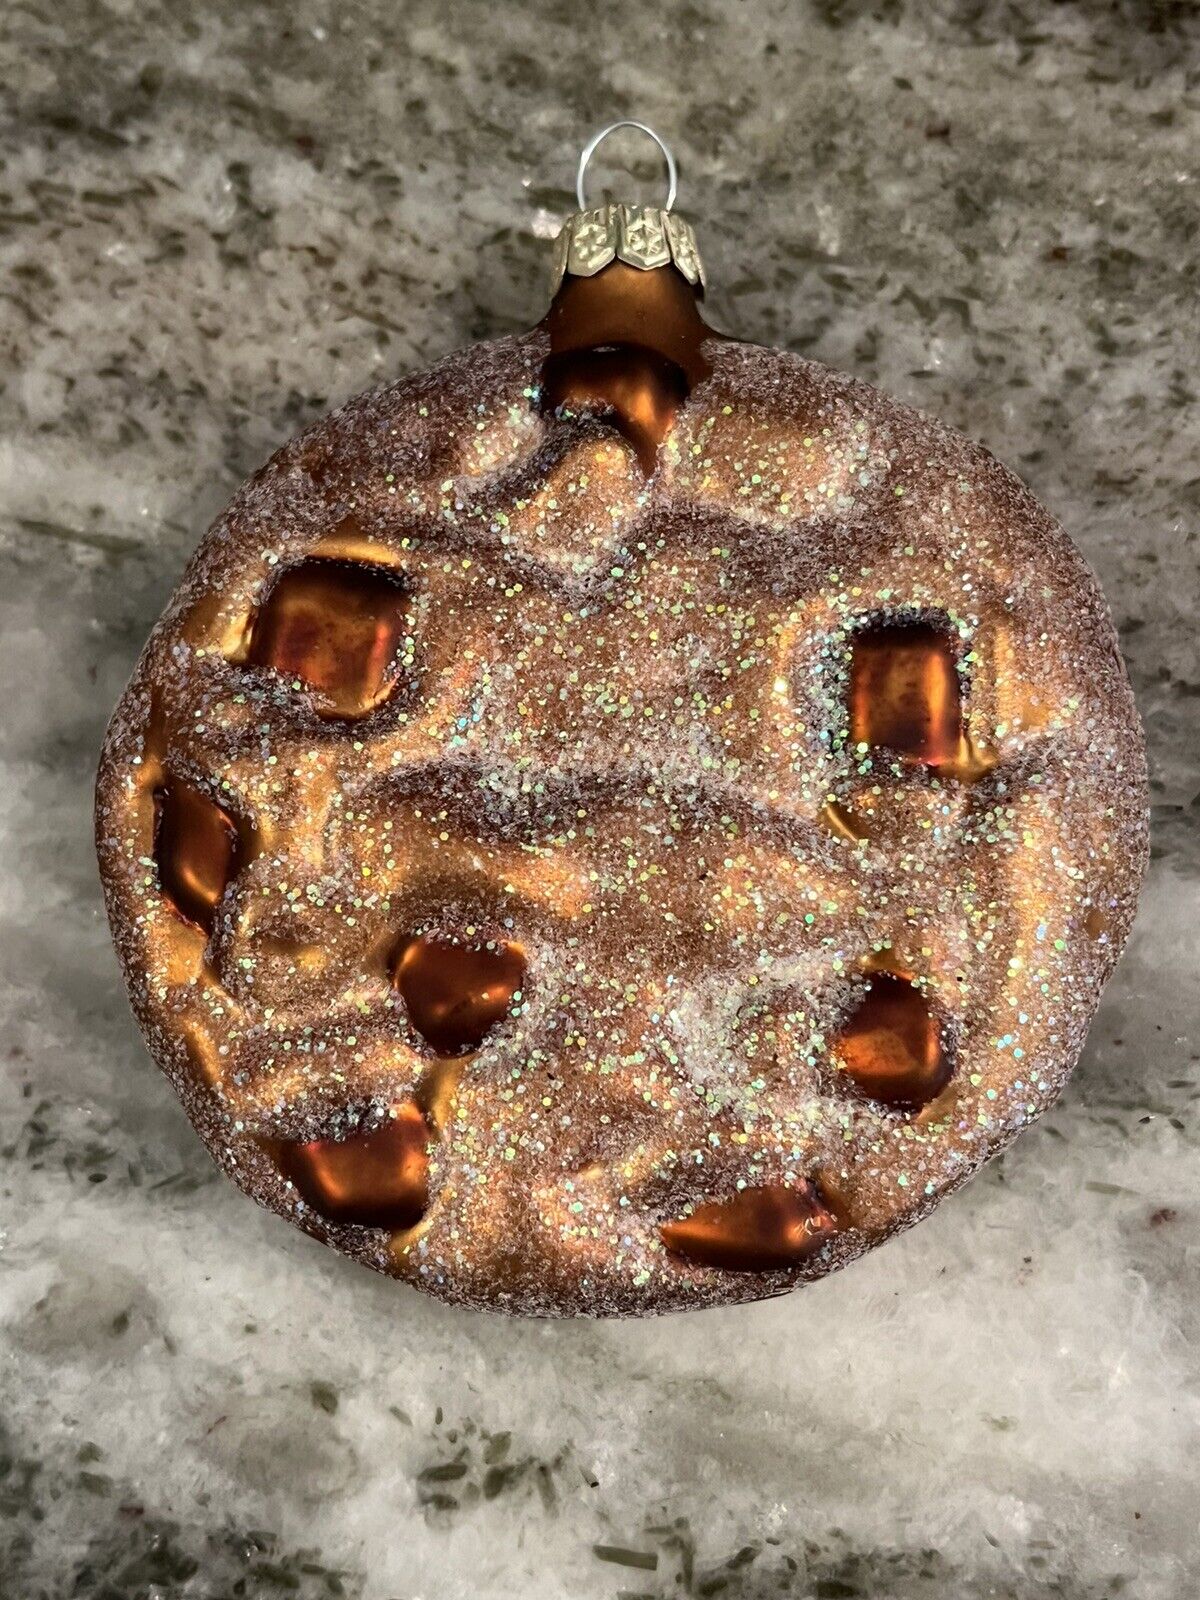 Lot of 2 glass cookie Christmas ornaments bronze tone glitter frosted 3” round